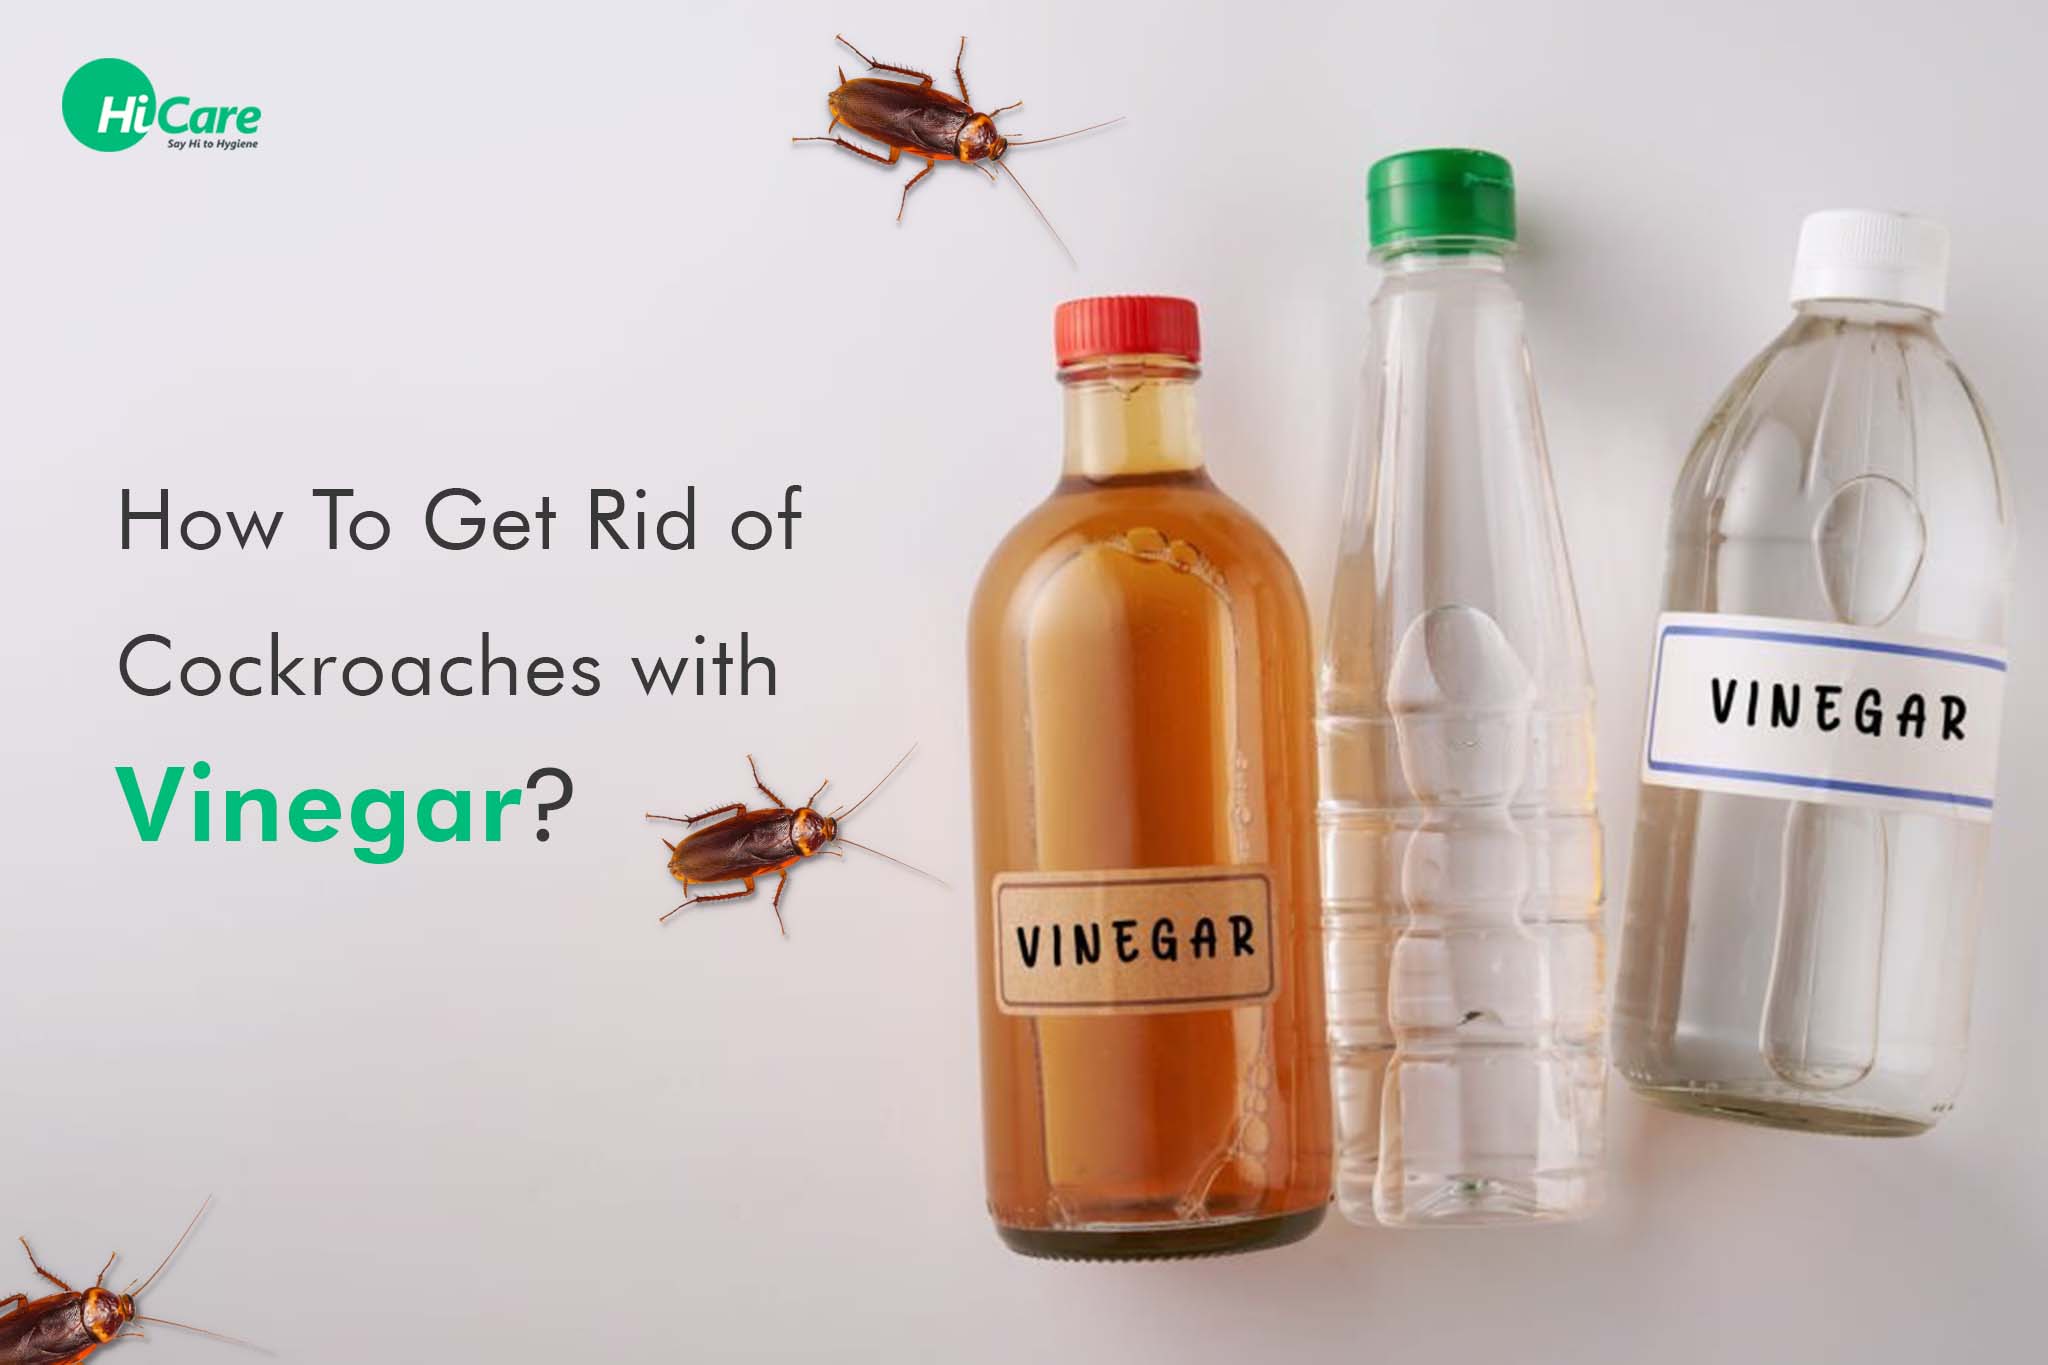 How to Use Vinegar to Get Rid of Cockroaches at Home?